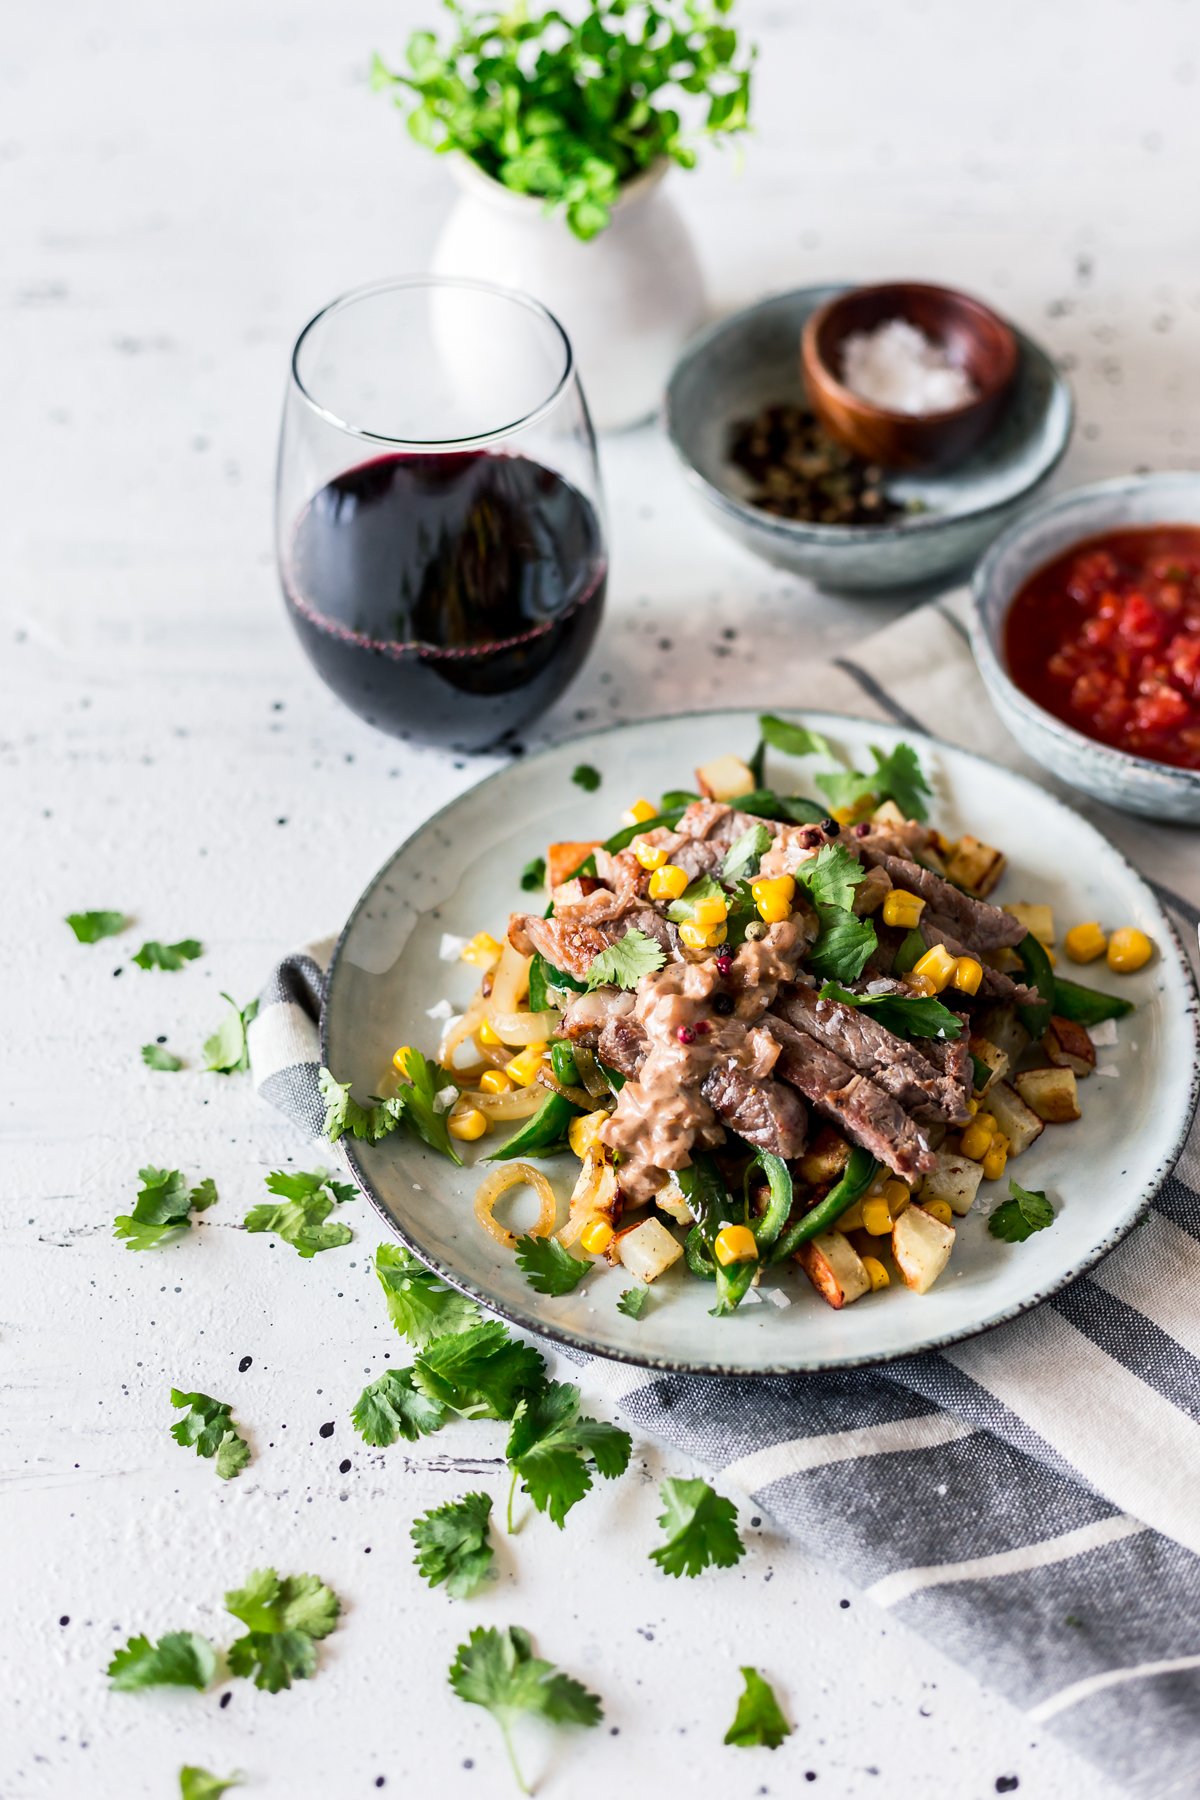 Get your summer grilling on with easy Mexican recipes like this Seared Steak with Corn, Poblano, and Roasted Potato Hash! Dinner is served. | asimplepantry.com